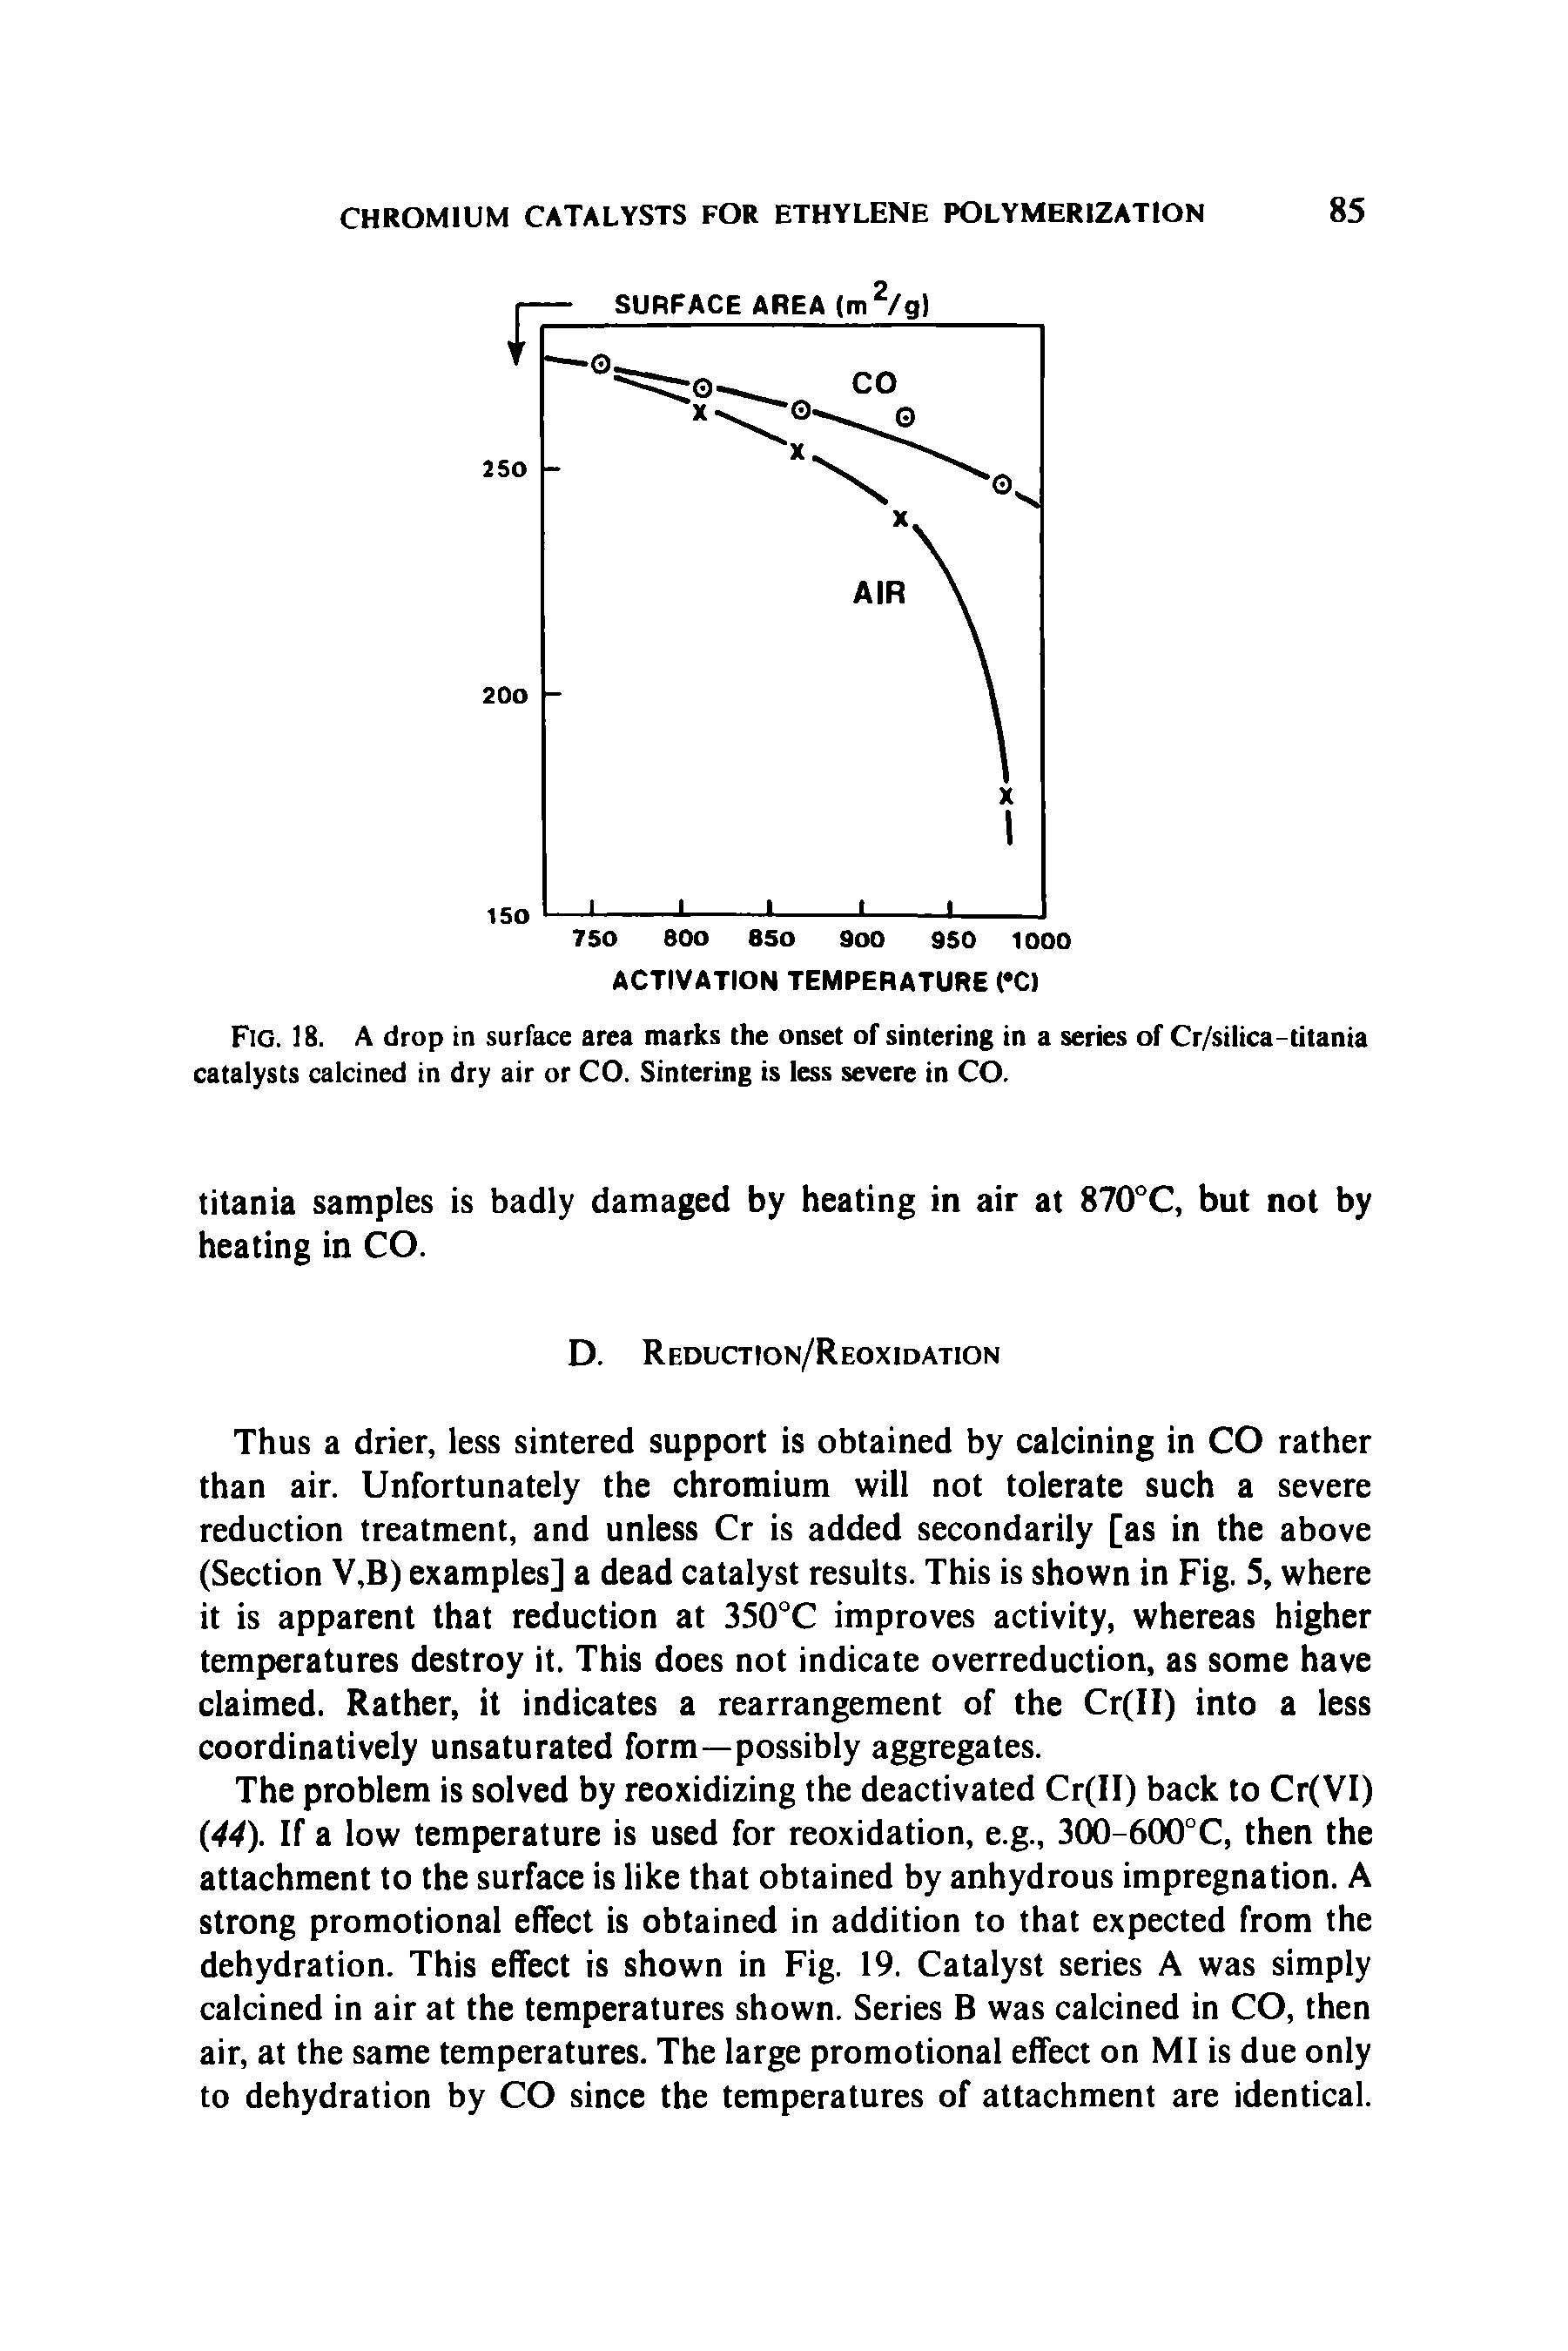 Fig. 18. A drop in surface area marks the onset of sintering in a series of Cr/silica-titania catalysts calcined in dry air or CO. Sintering is less severe in CO.